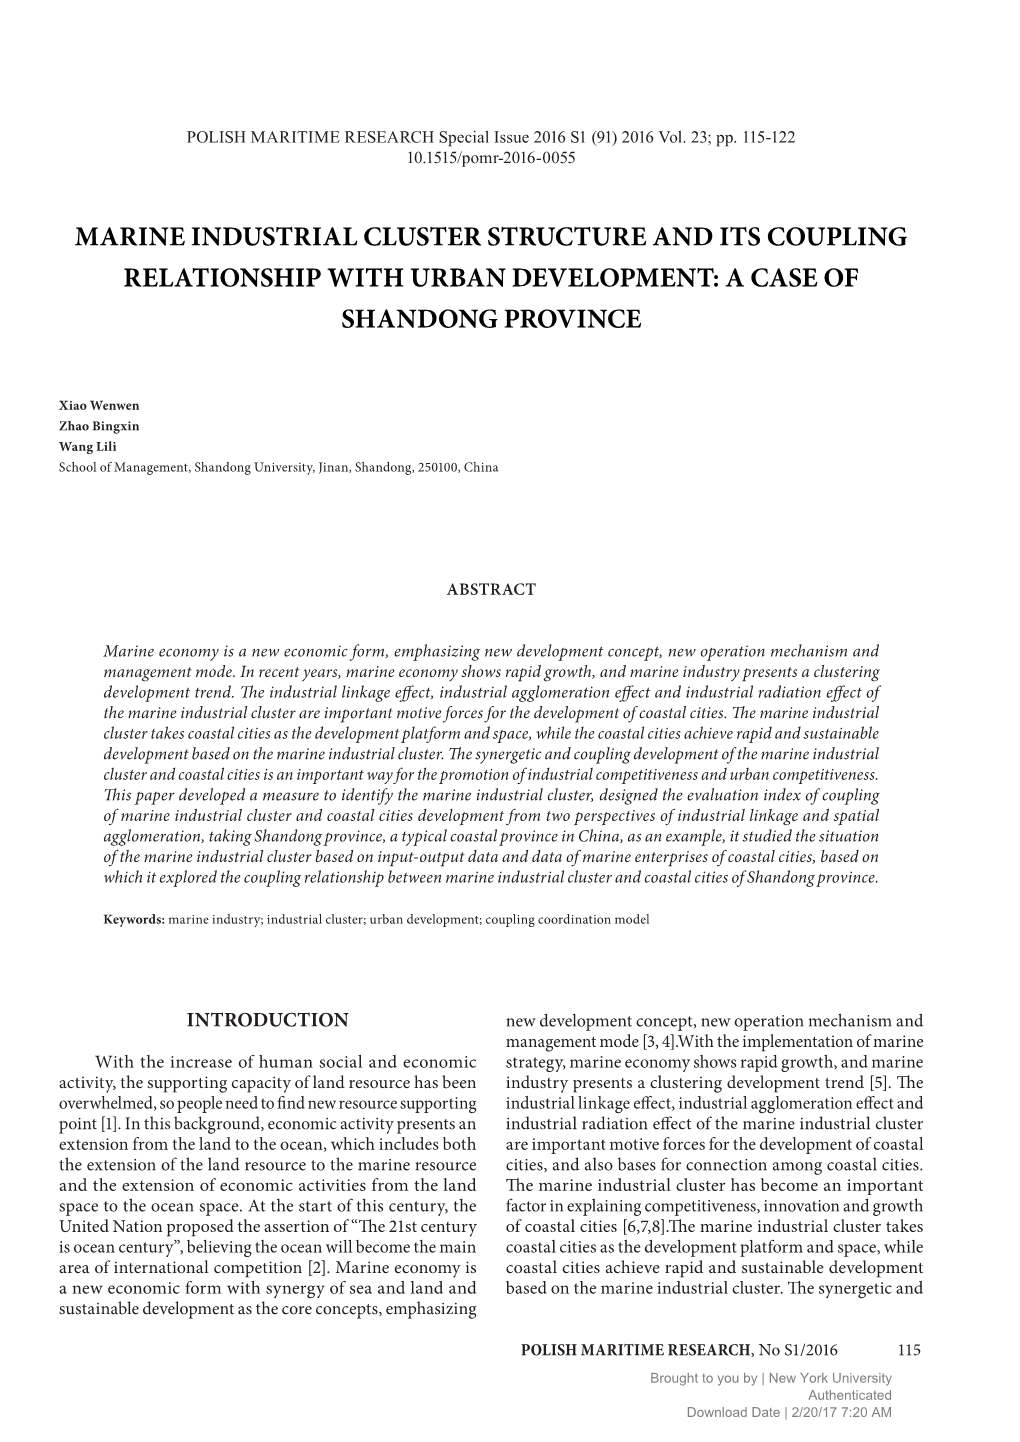 Marine Industrial Cluster Structure and Its Coupling Relationship with Urban Development: a Case of Shandong Province